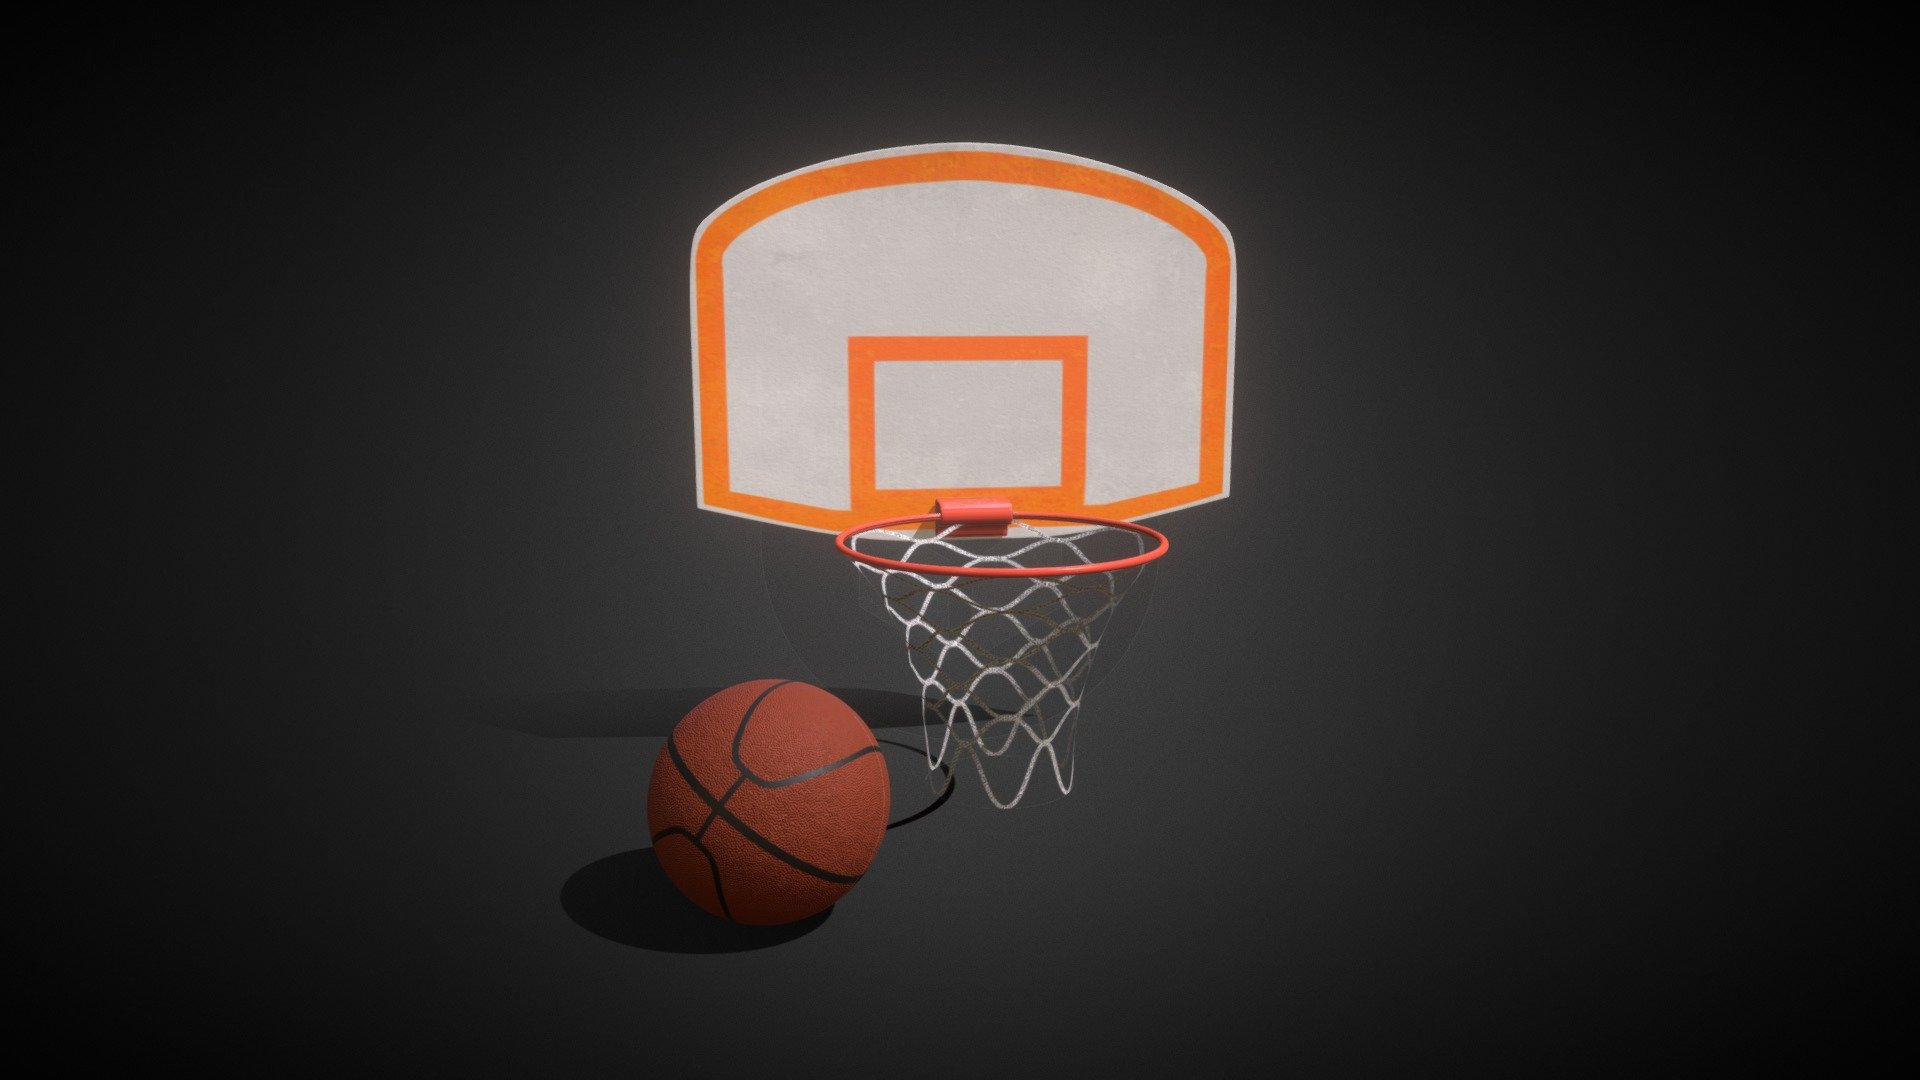 Basketball backboard, hoop and net with ball created for background props

Modeled in Maya
Textured in Substance Painter - Basketball Hoop - Download Free 3D model by Alec Huxley (@alechuxley) 3d model